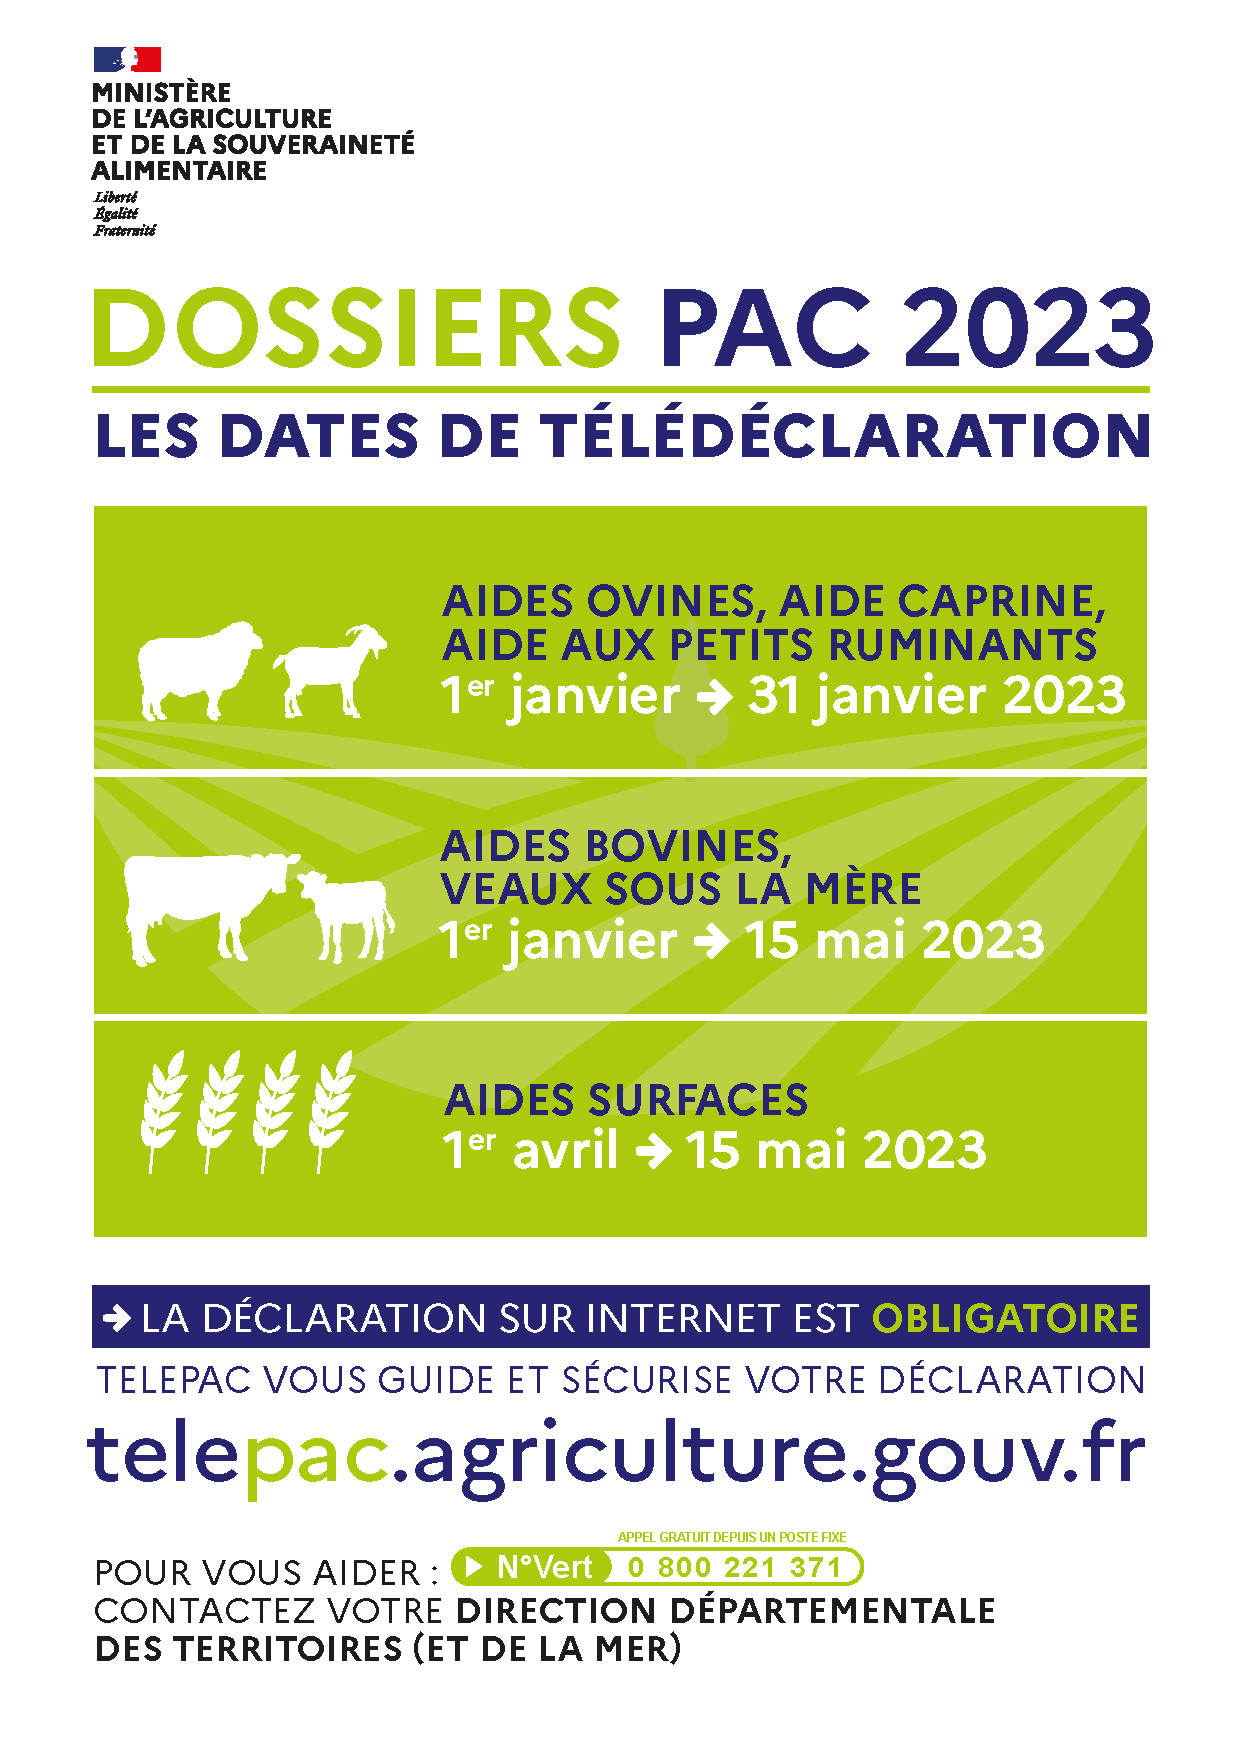 DOSSIERS PAC 2023